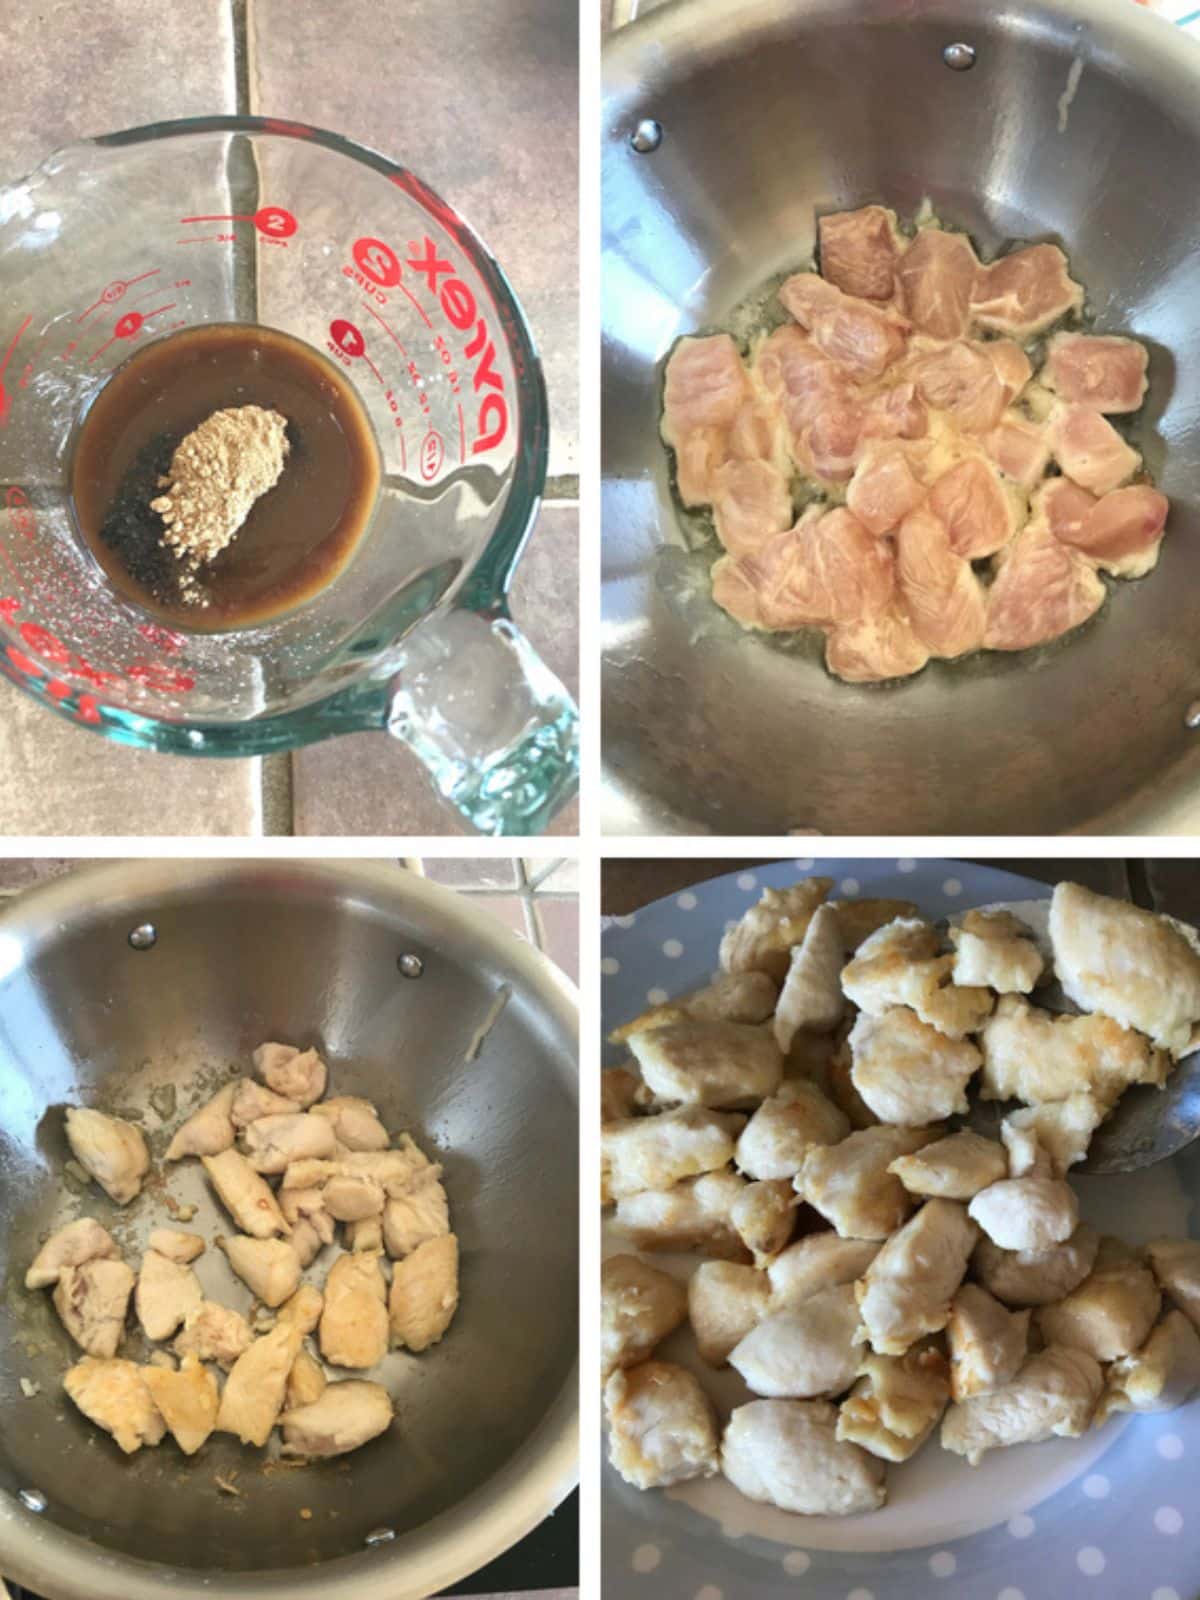 A collage of 4 images showing how to stri fry kung pao chicken.